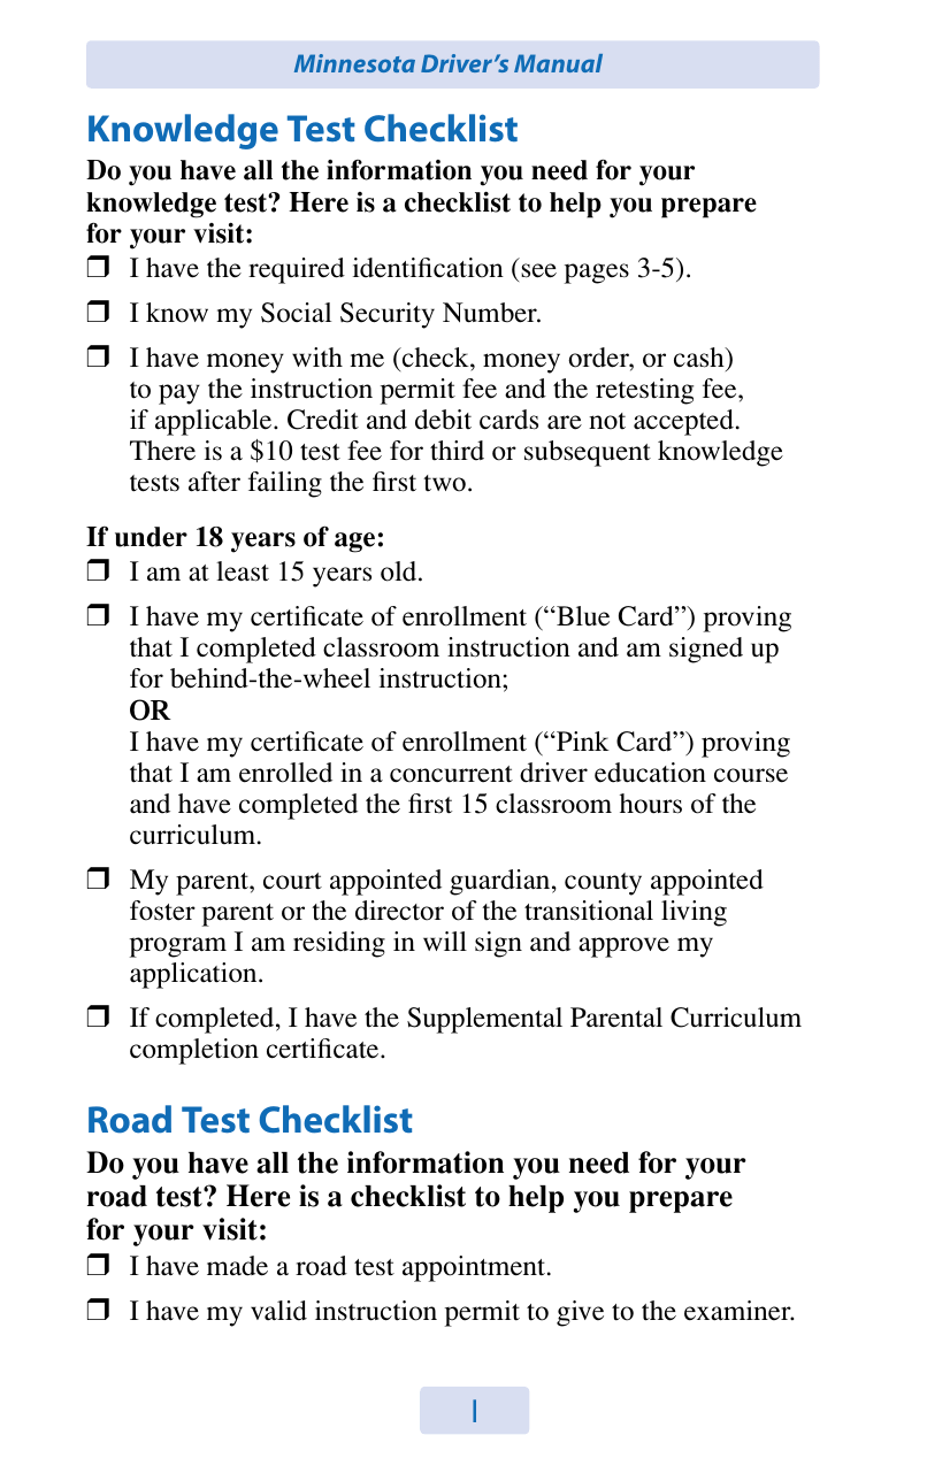 Check List From Drivers Manual - Minnesota, Page 1